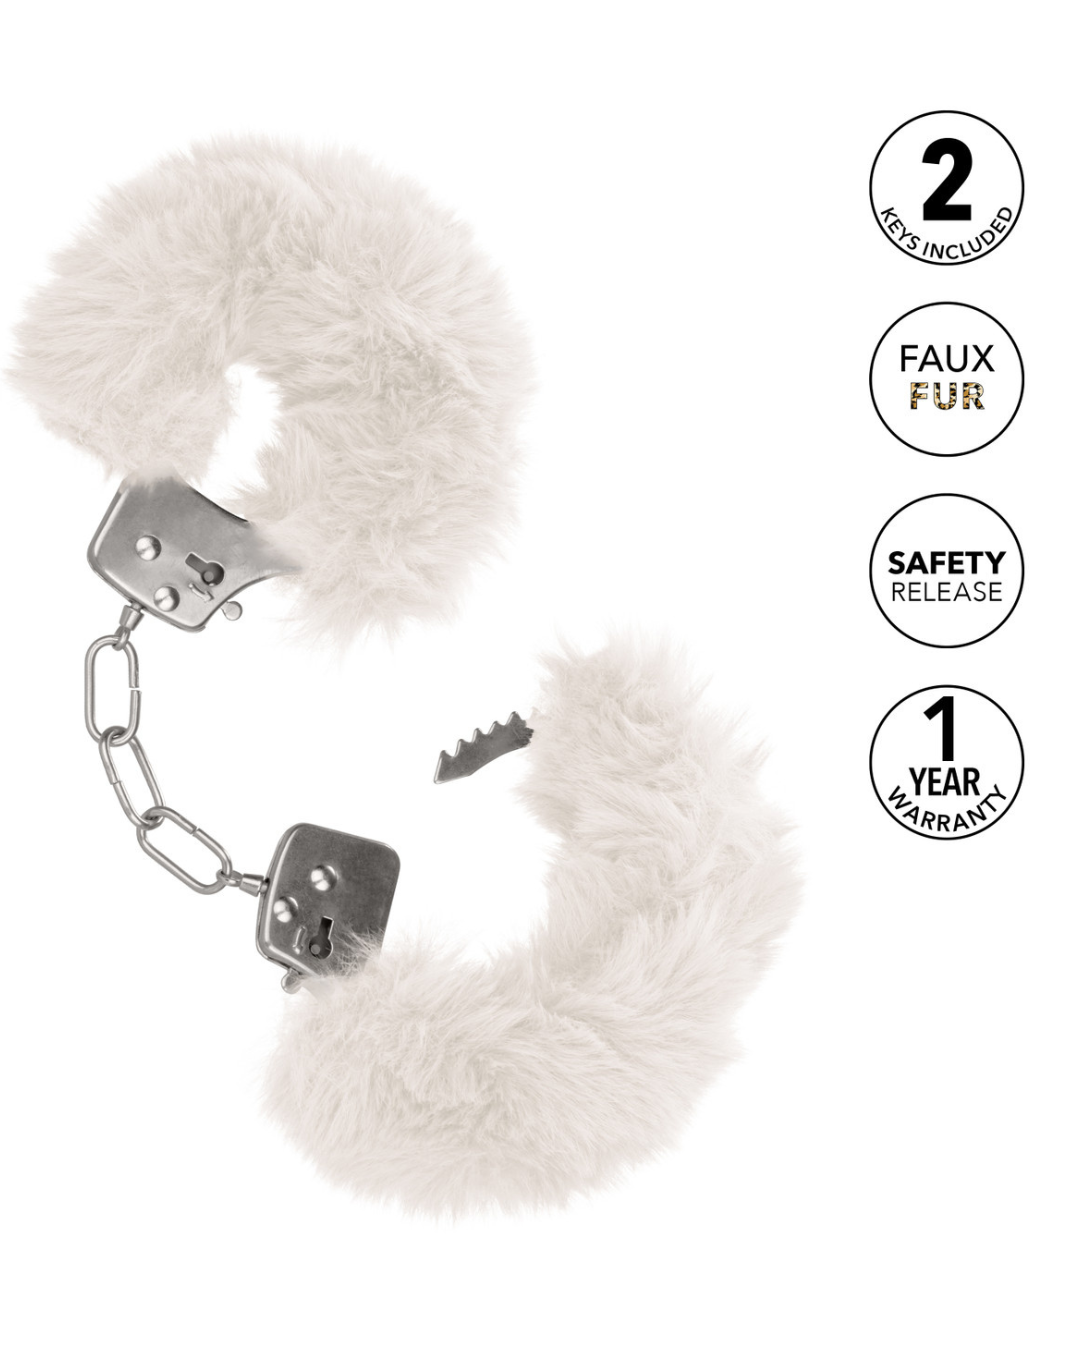 Ultra Fluffy Furry Cuffs - White locked and unlocked on a white background with additional features on the right hand side